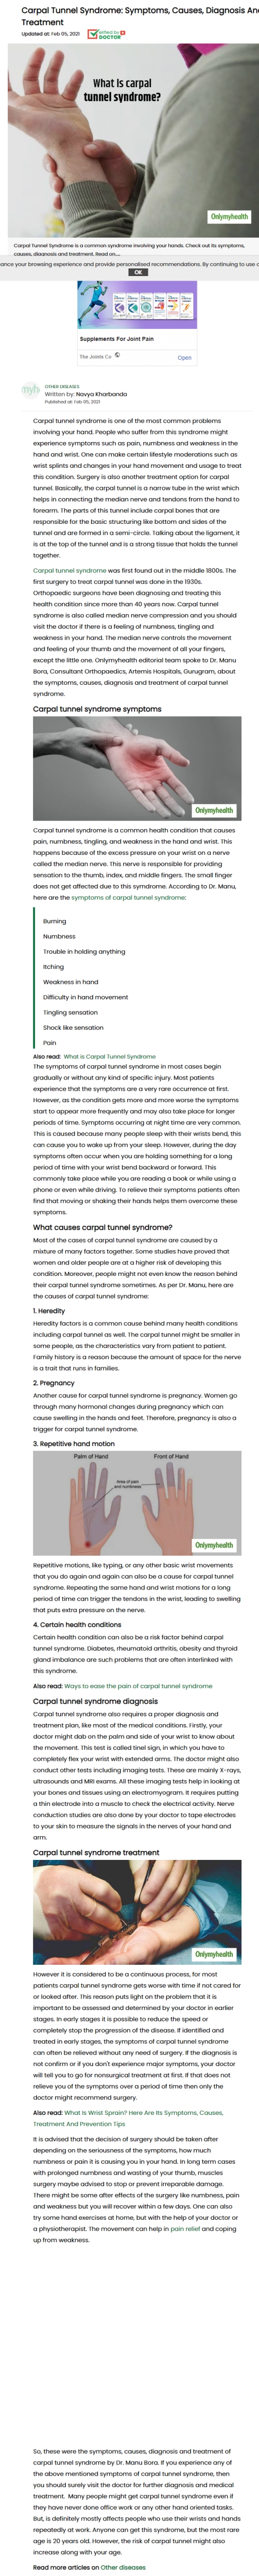 carpal-tunnel-syndrome-symptoms-causes-diagnosis-and-treatment